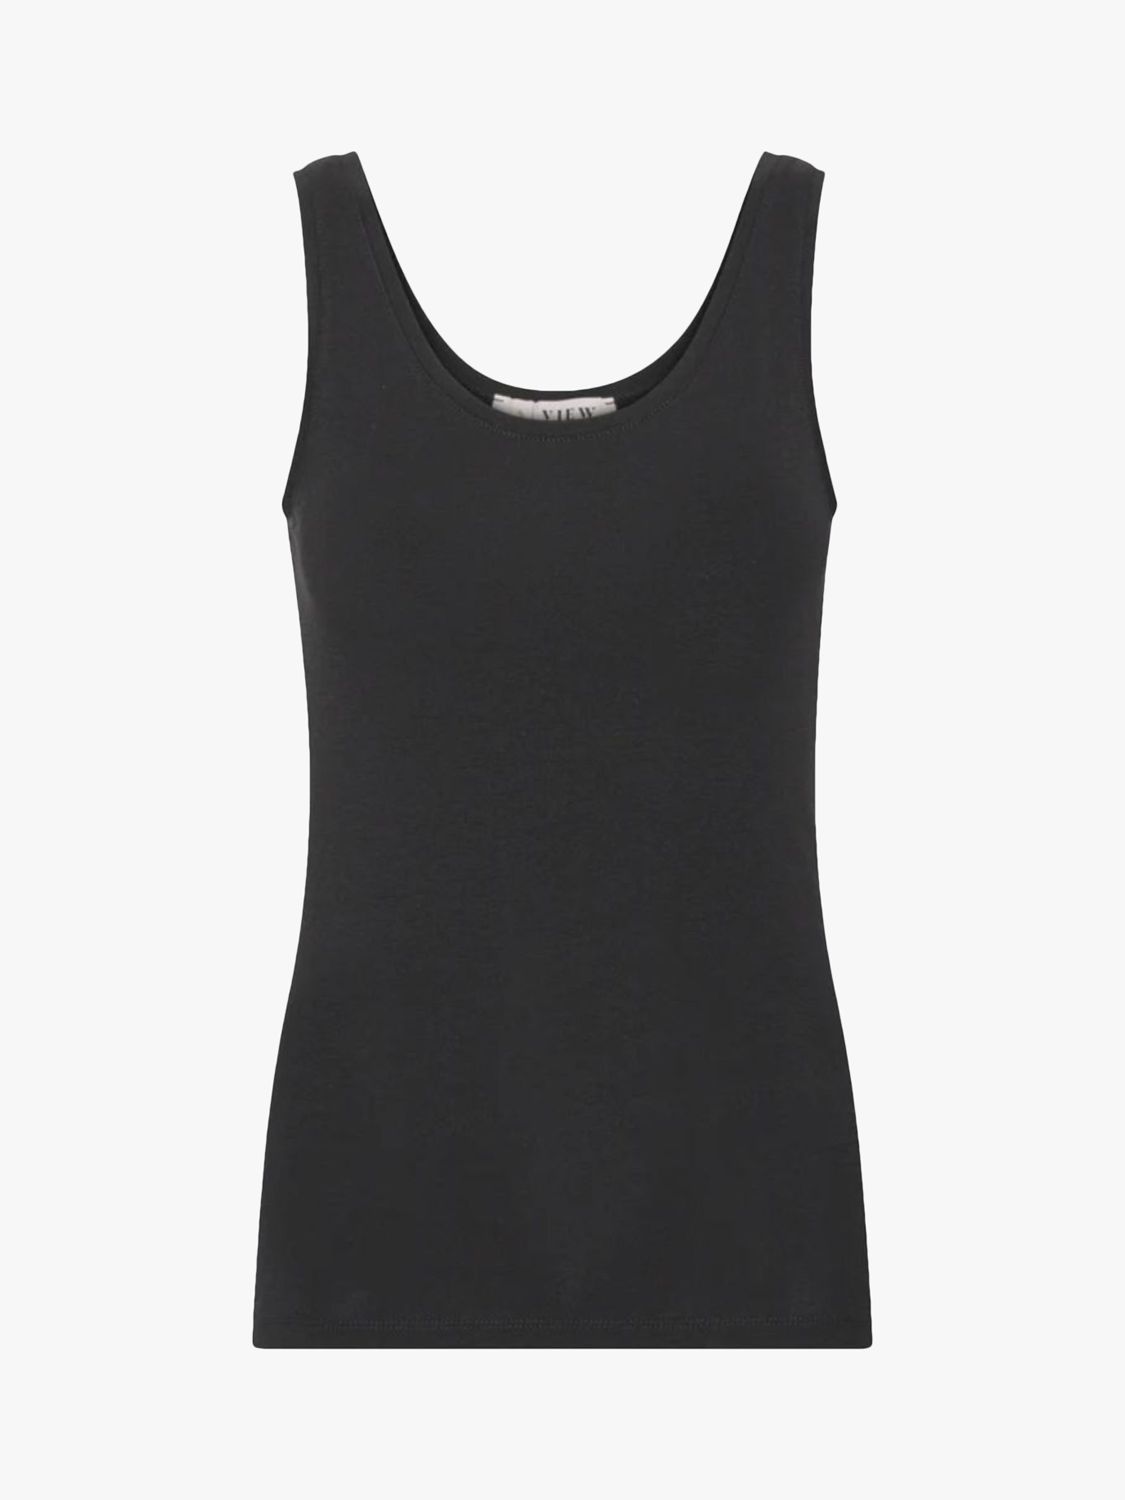 A-VIEW Stabil Tank Top, Black at John Lewis & Partners